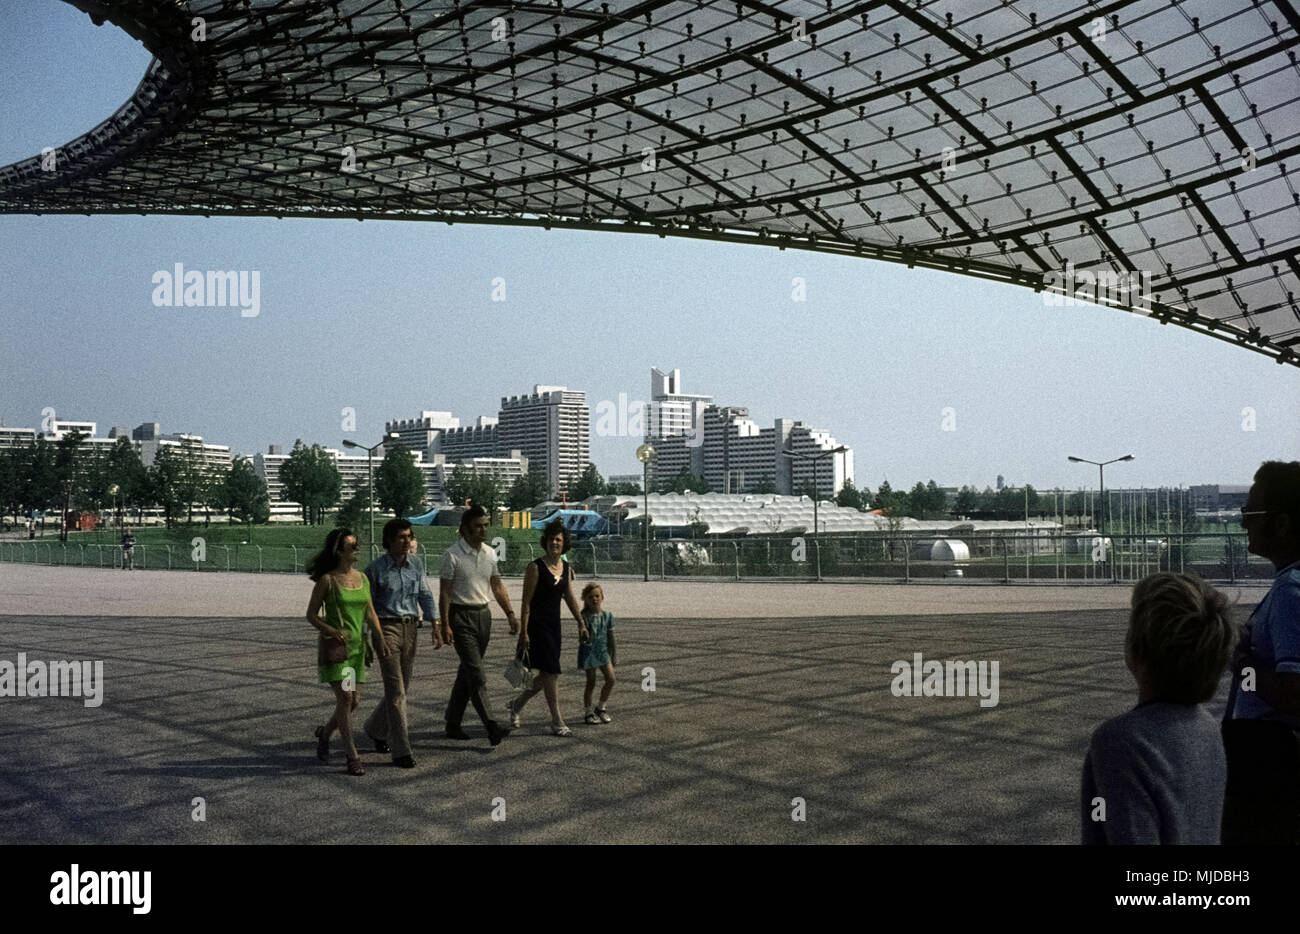 Besucher besichtigen das Gelände des Olympiaparks. People are visiting the Olympiapark of Munich just before the Olympic Games in 1972. Stock Photo